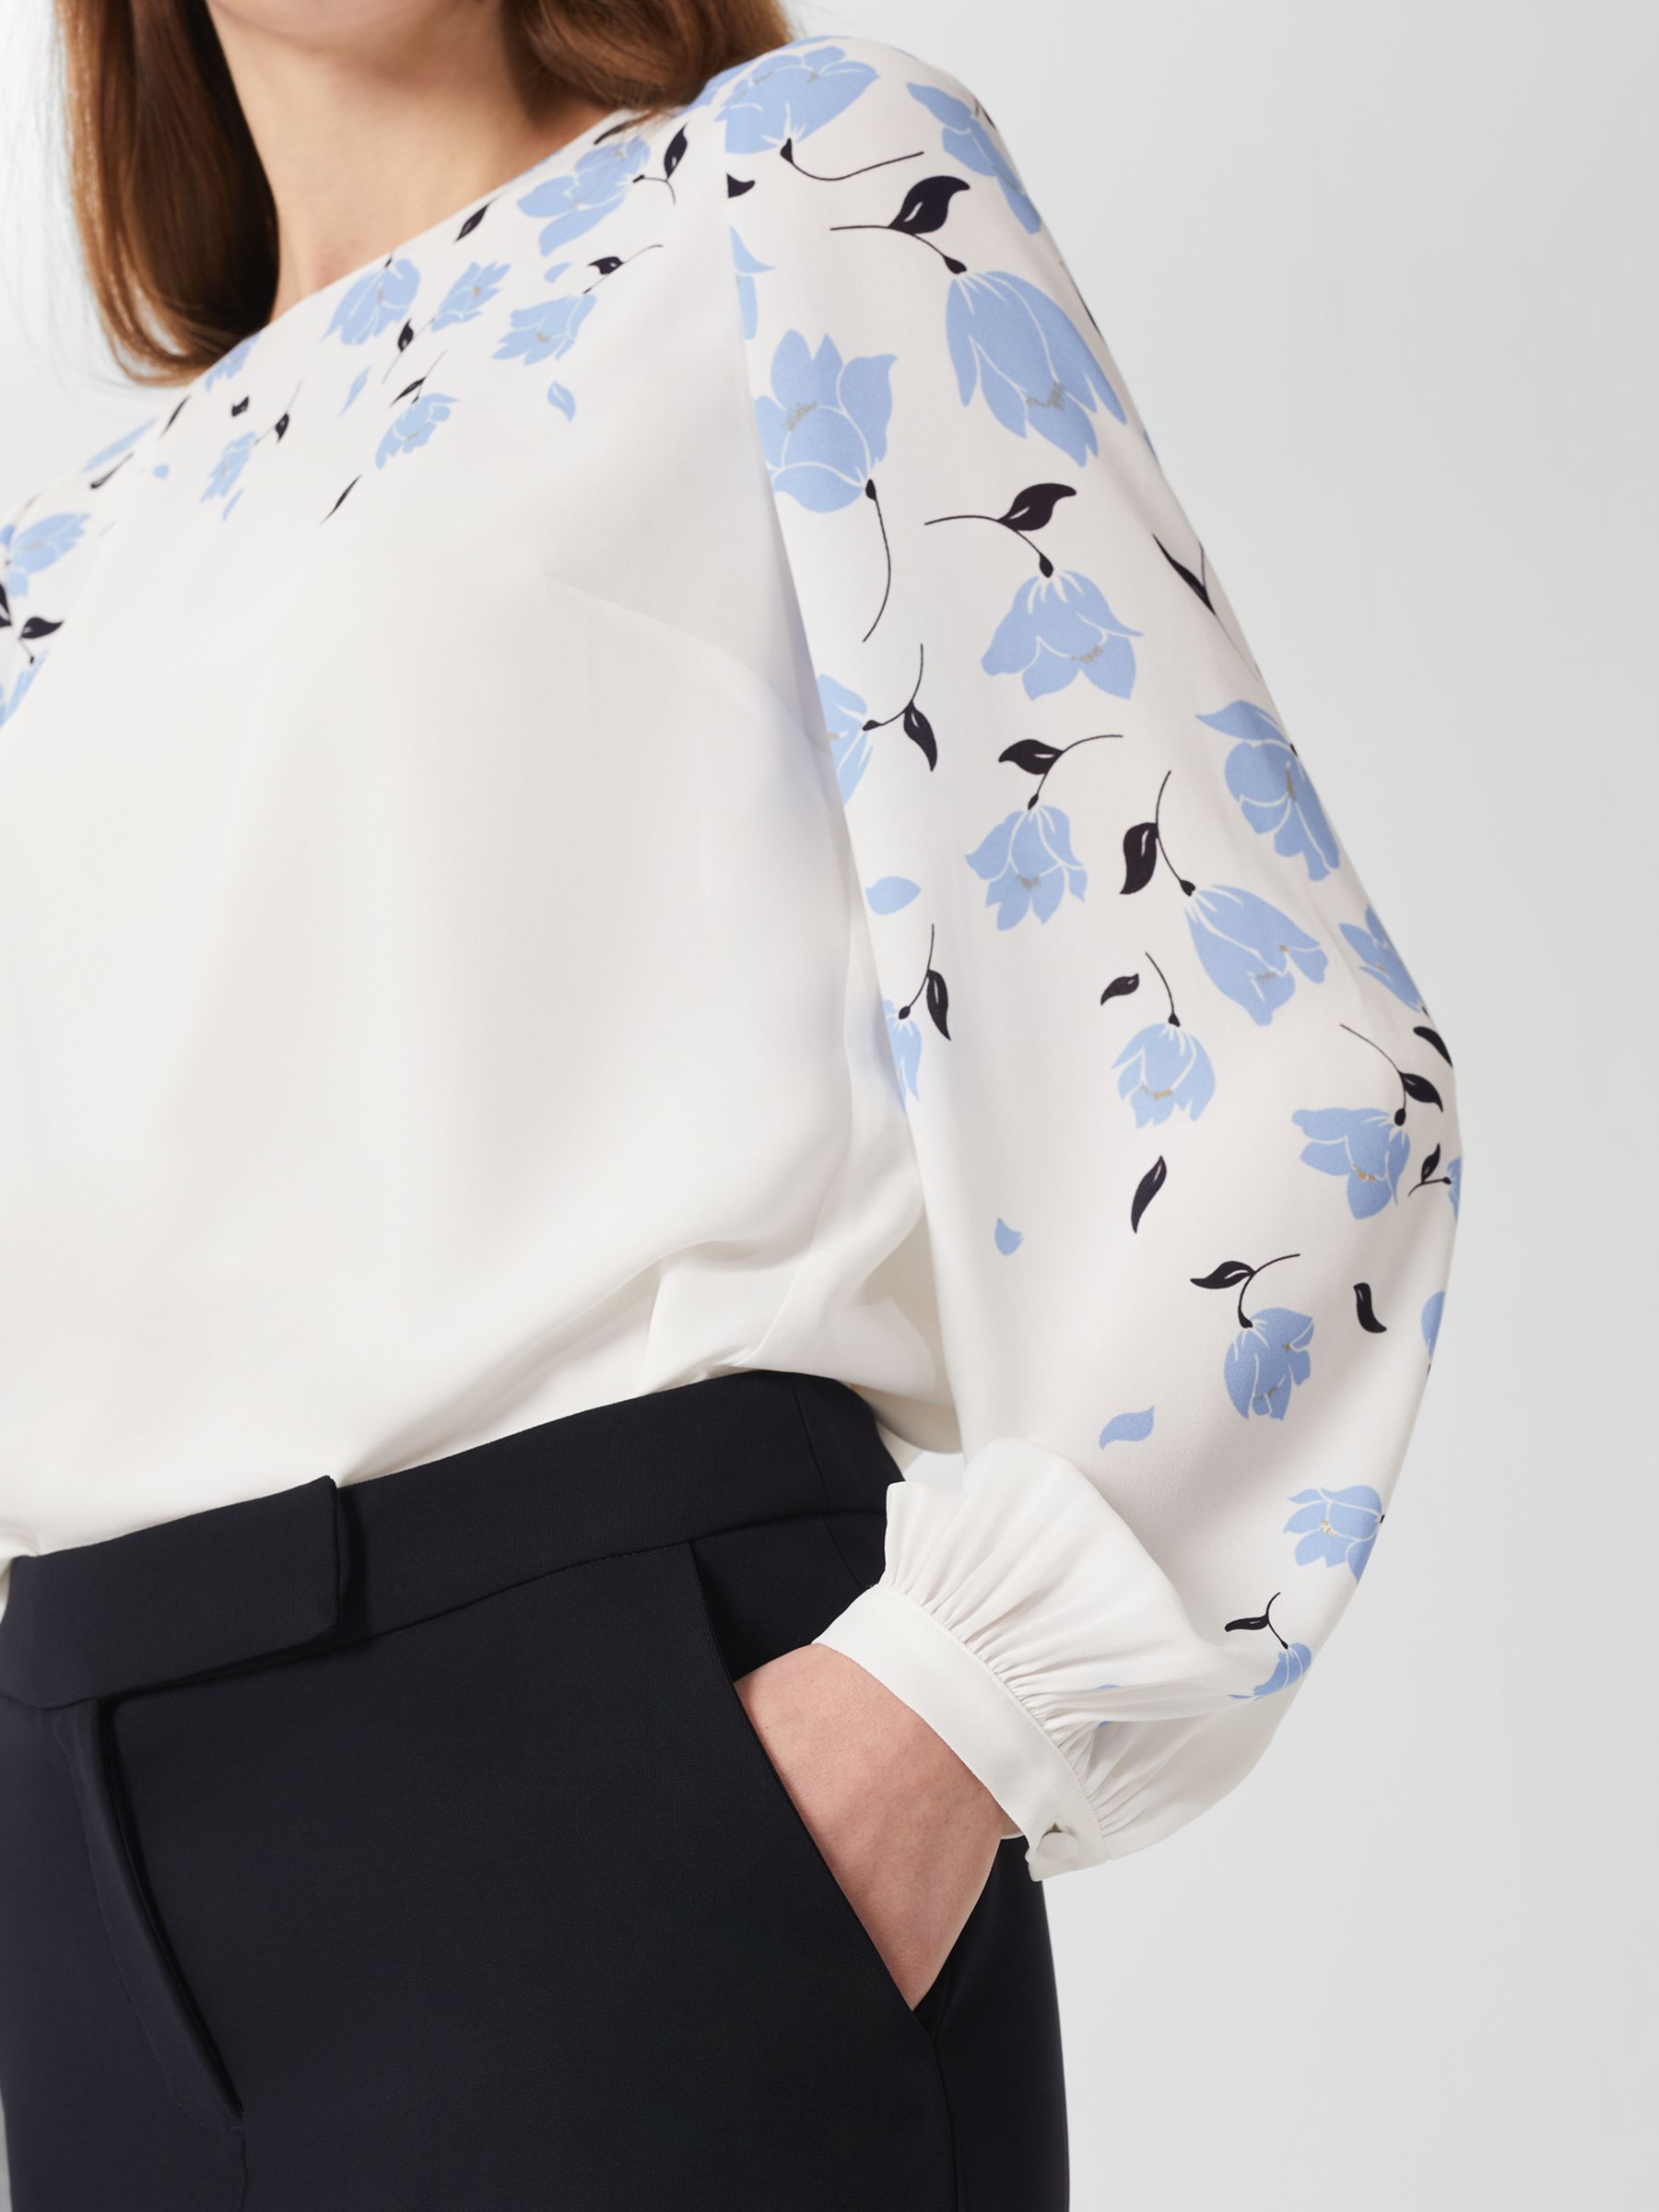 Buy Hobbs Zoey Floral Placement Print Blouse, Ivory/Blue Online at johnlewis.com